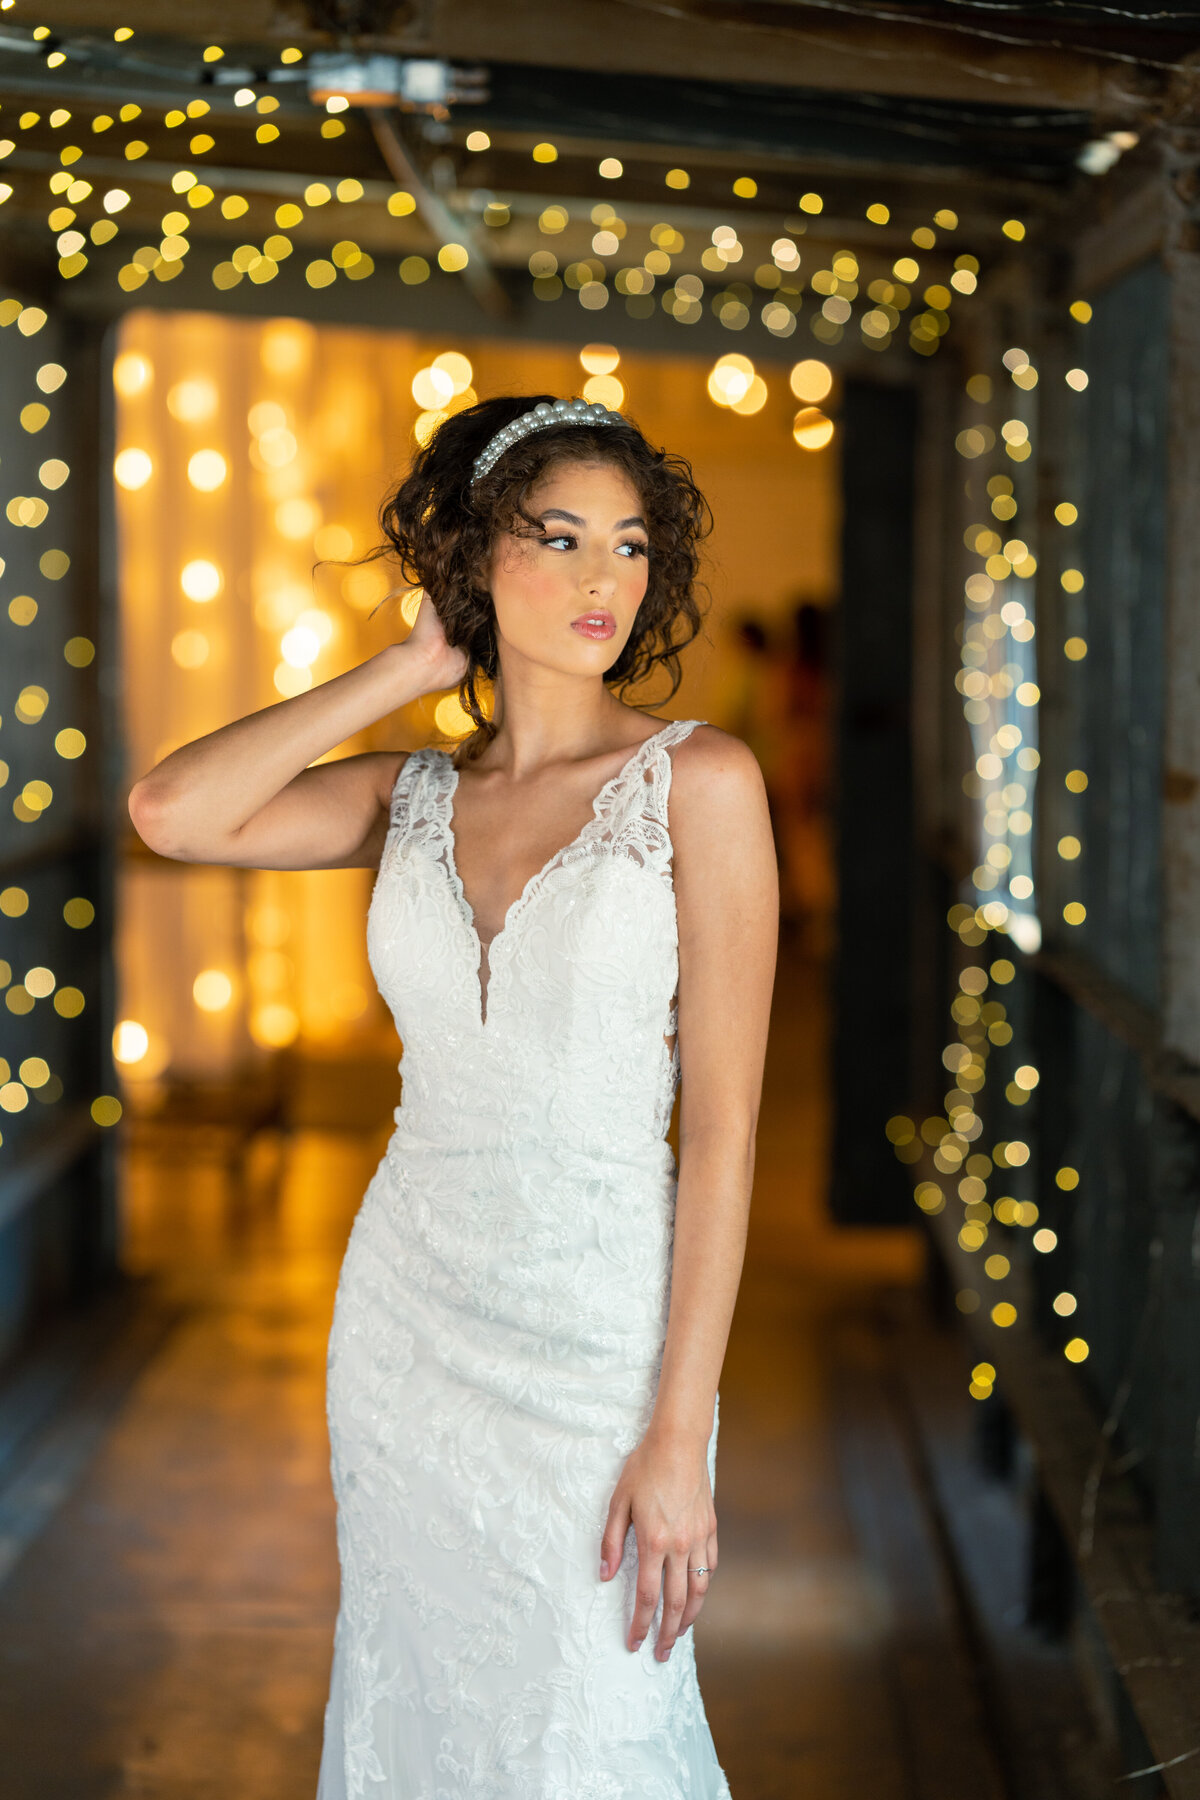 Curly-haired brunette model wearing lacey wedding dress with thick straps against a sparkly hall background.